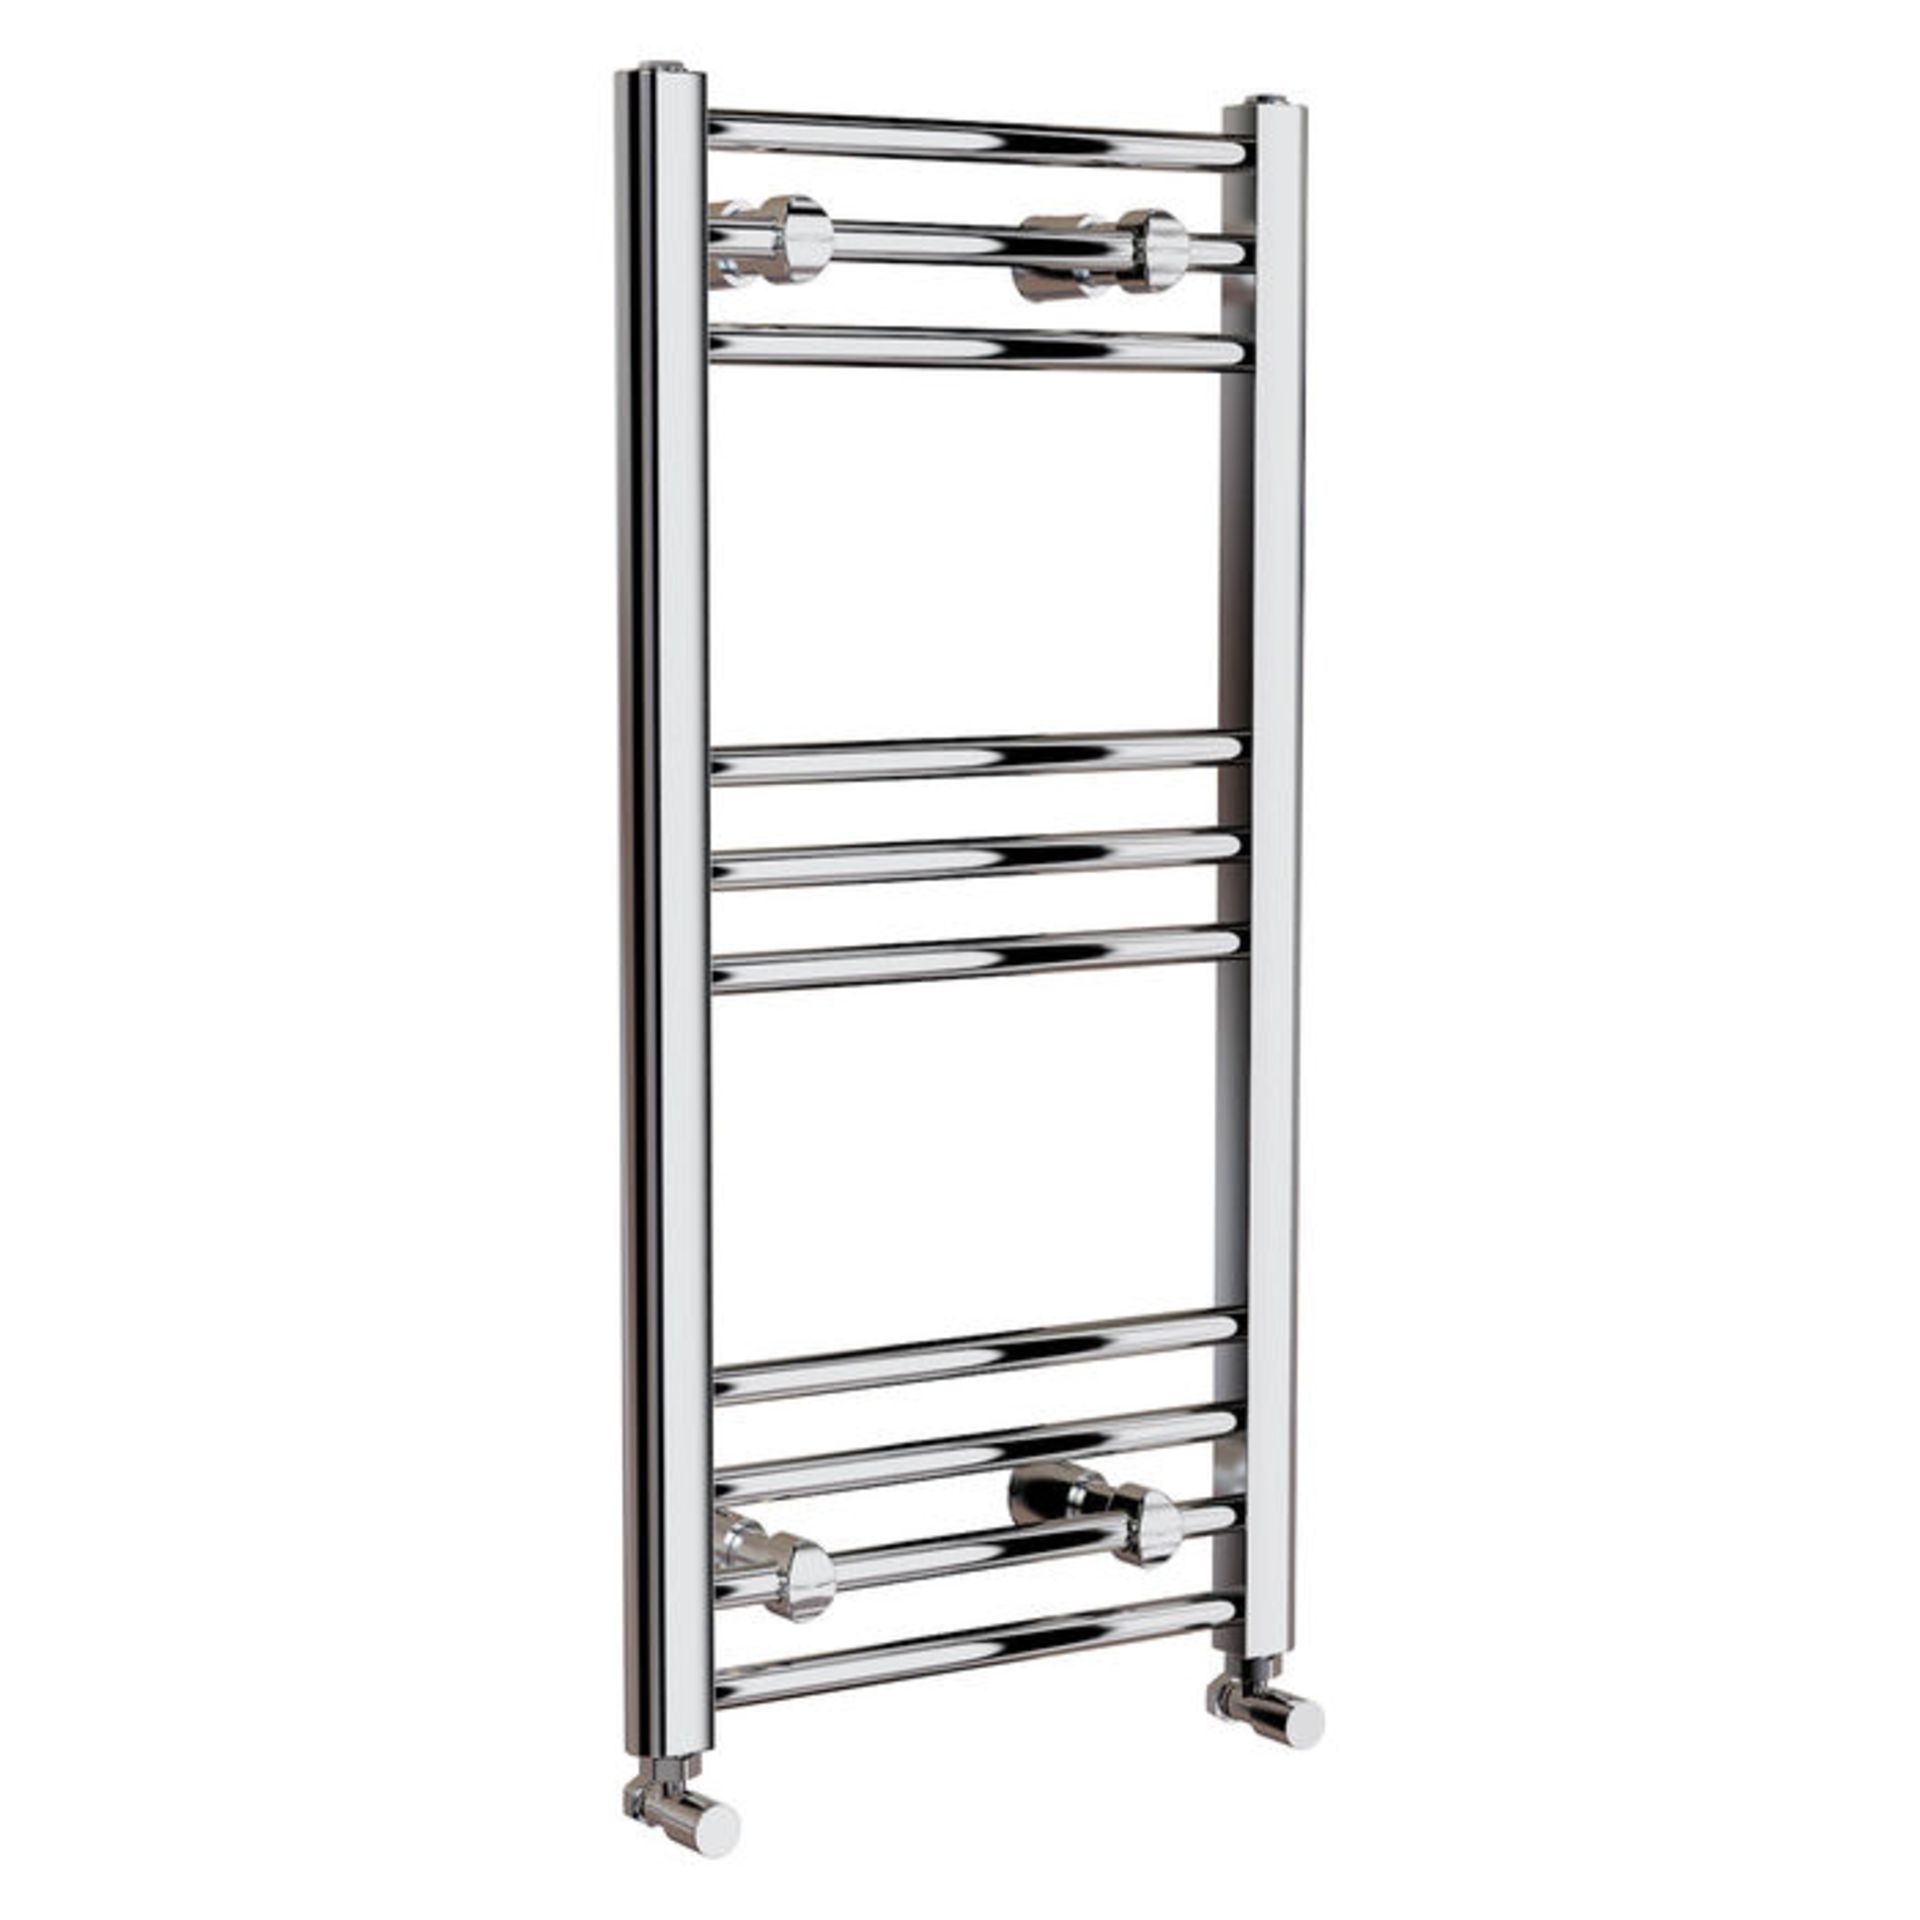 (TY49) 700x400mm - 20mm Tubes - Chrome Heated Straight Rail Ladder Towel Radiator. Low carbon - Image 3 of 3